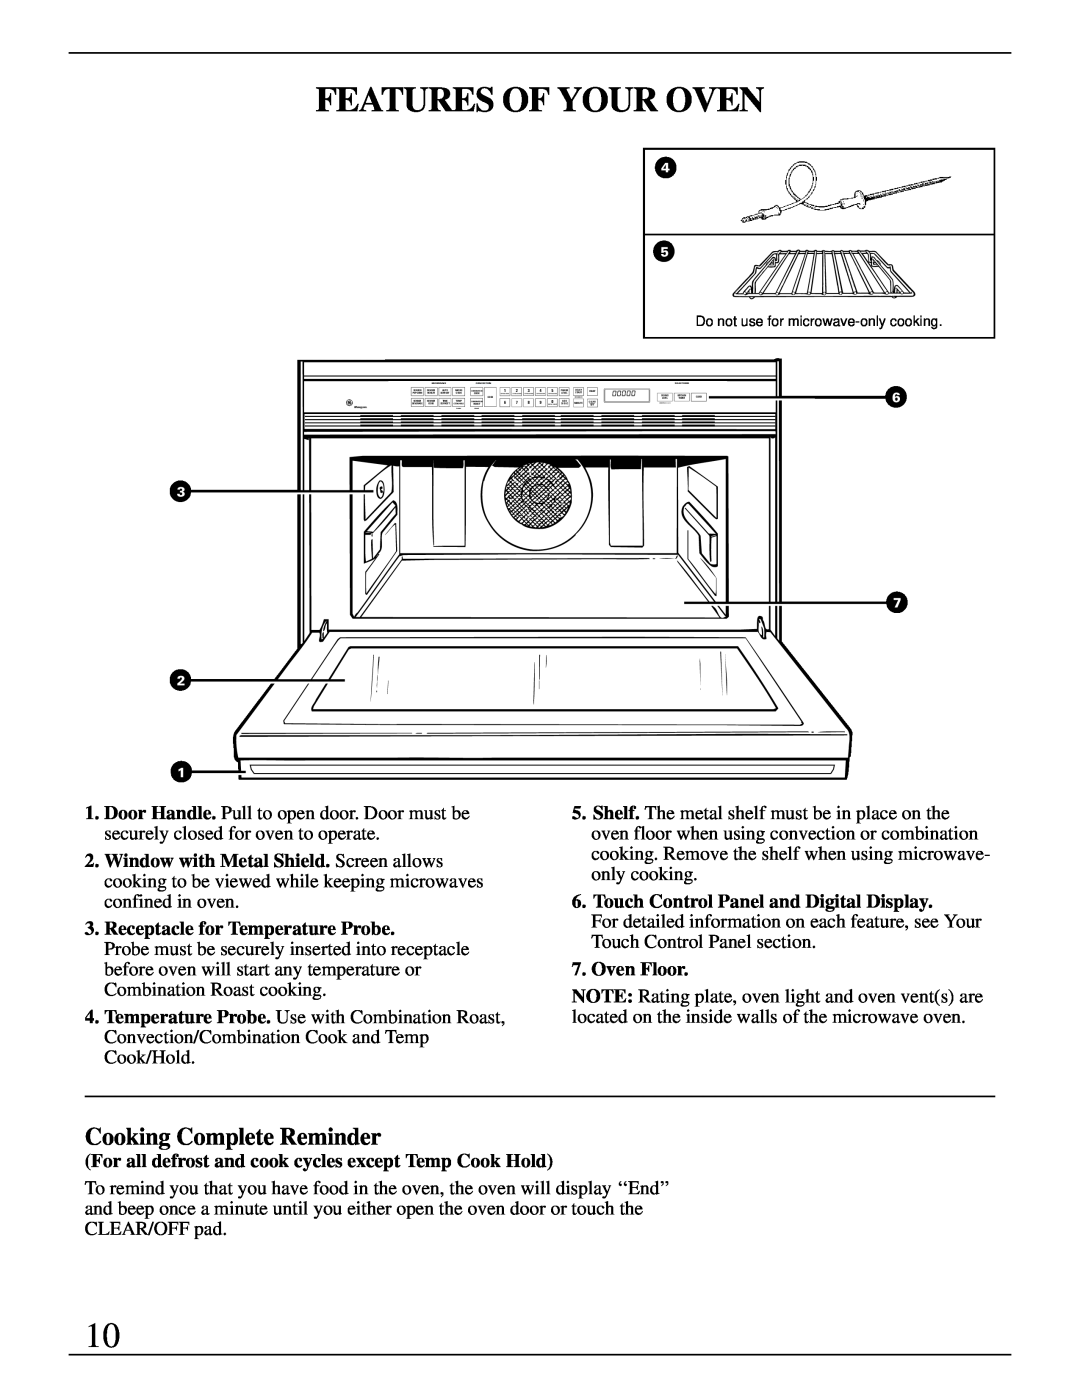 GE Monogram ZMC1090 Series manual Features Of Your Oven, Cooking Complete Reminder 